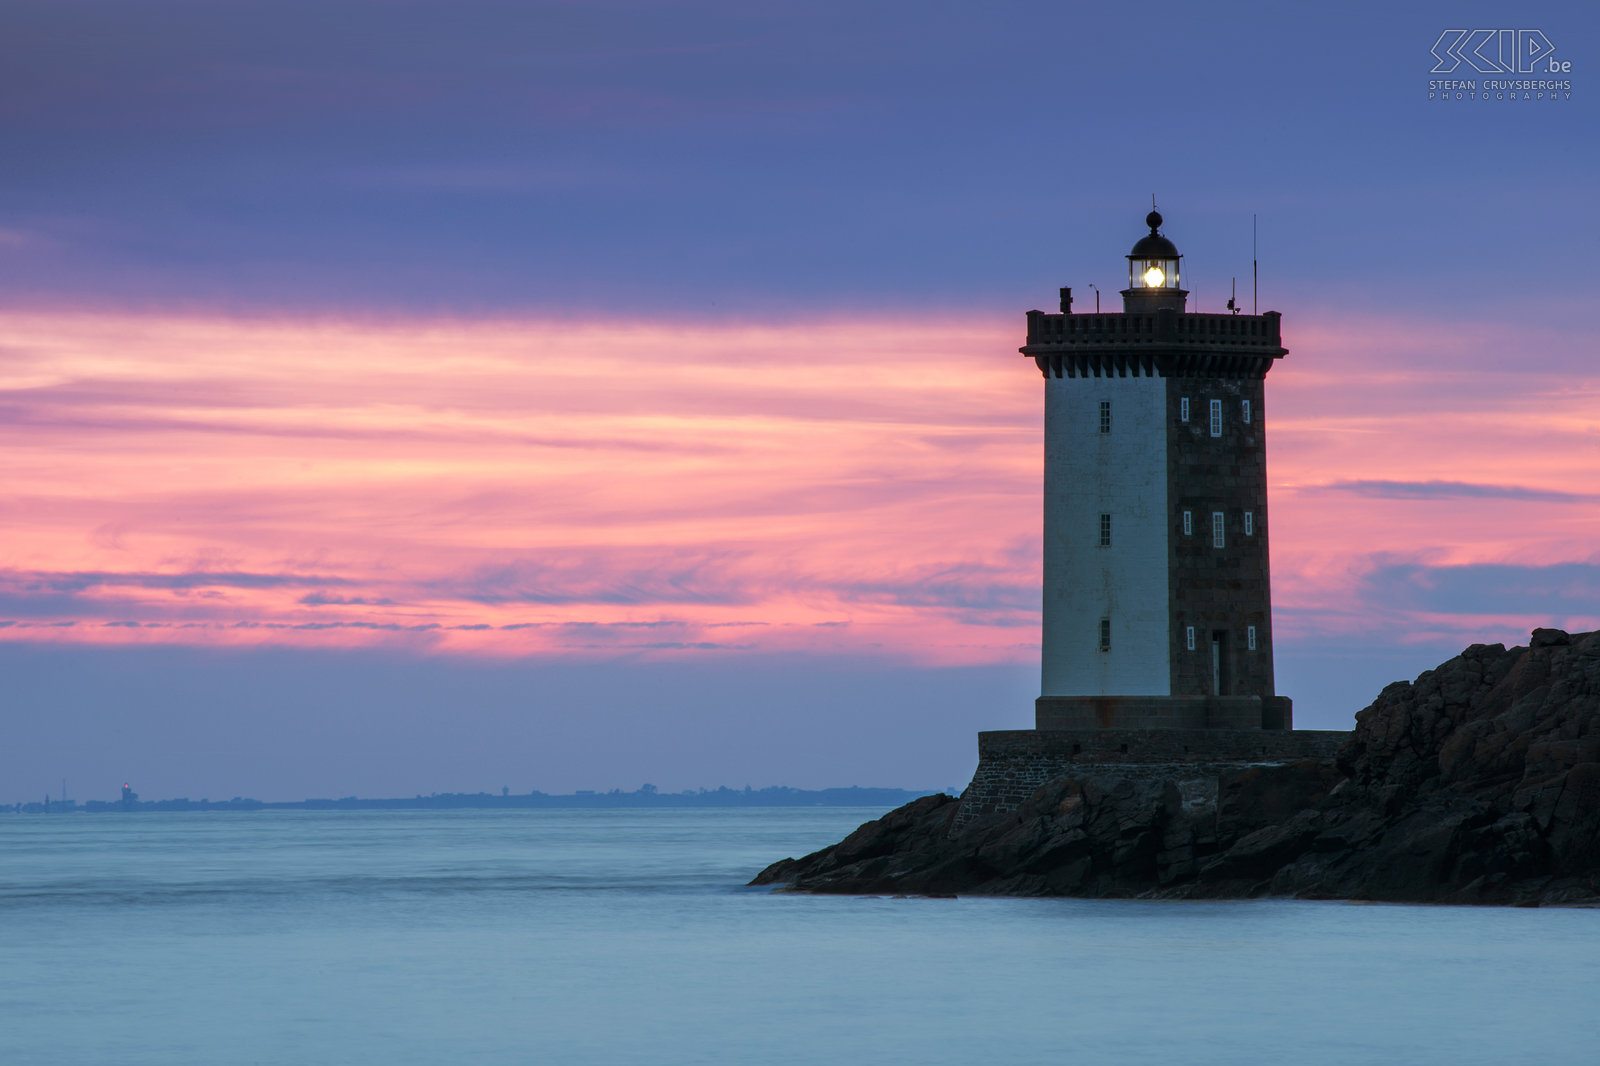 Le Conquet - Sunset Phare de Kermorvan Sunset with in the background the lighthouse of Kermorvan. Stefan Cruysberghs